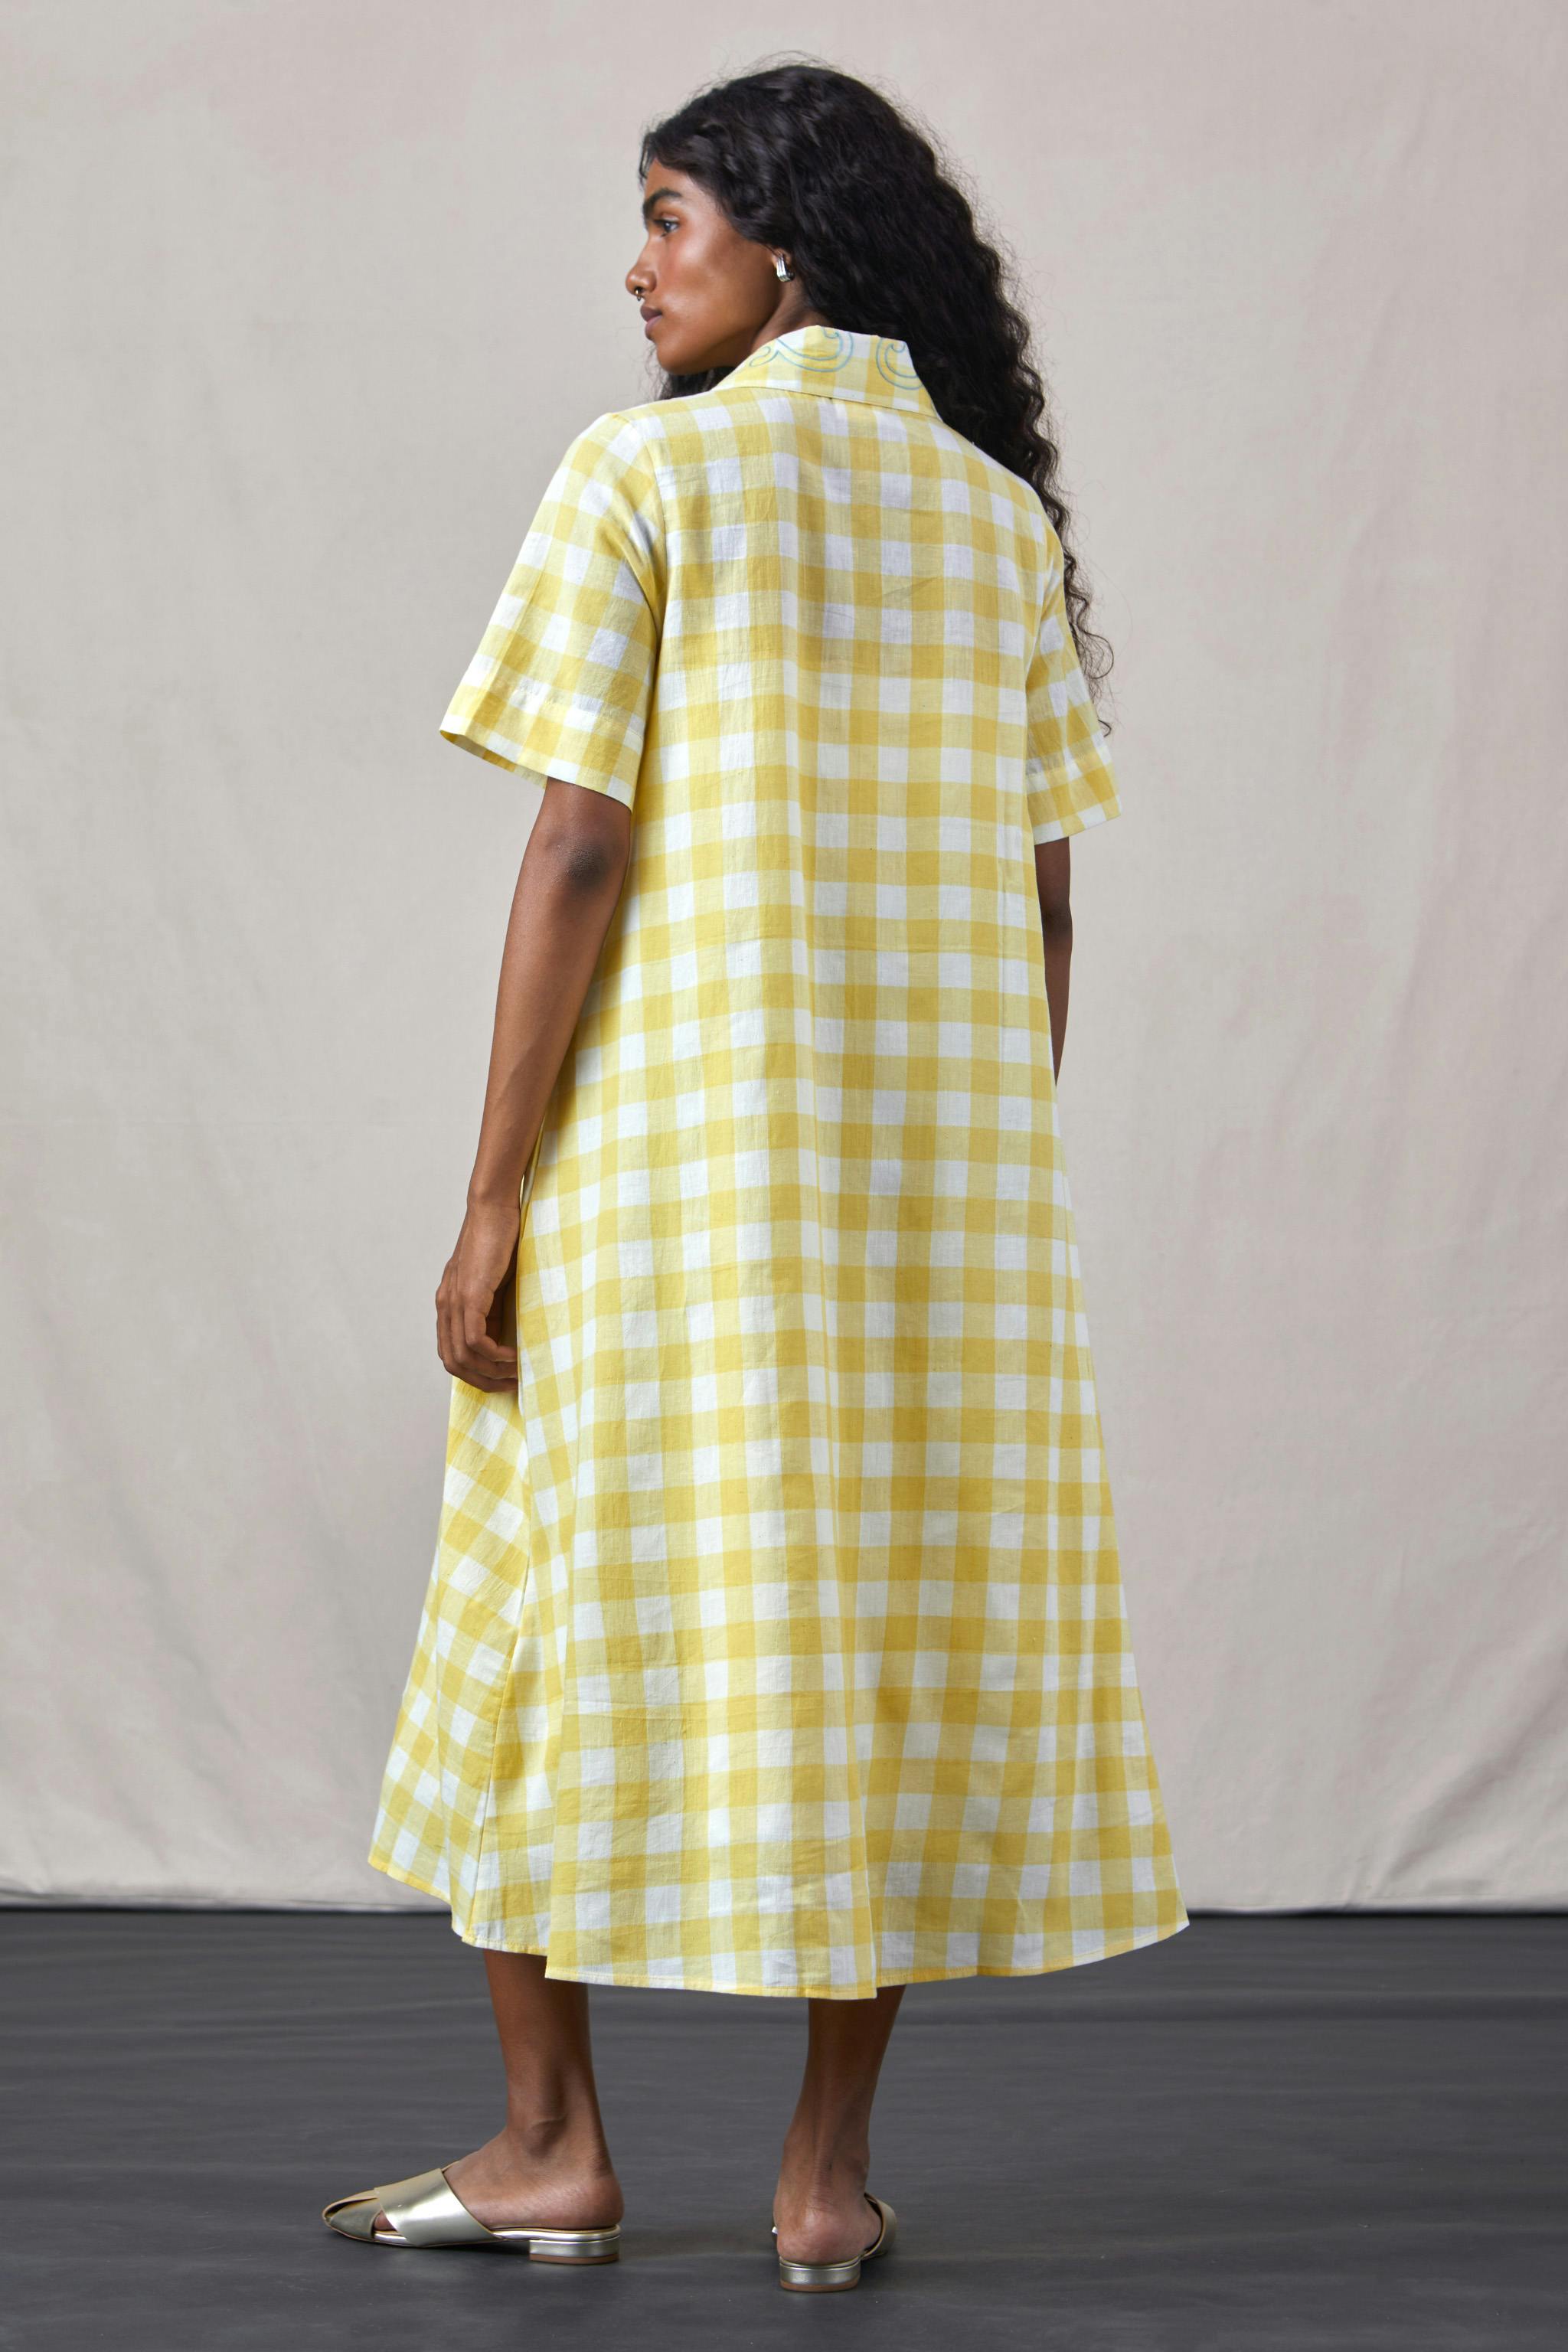 Thumbnail preview #3 for Navvi - Dress Yellow